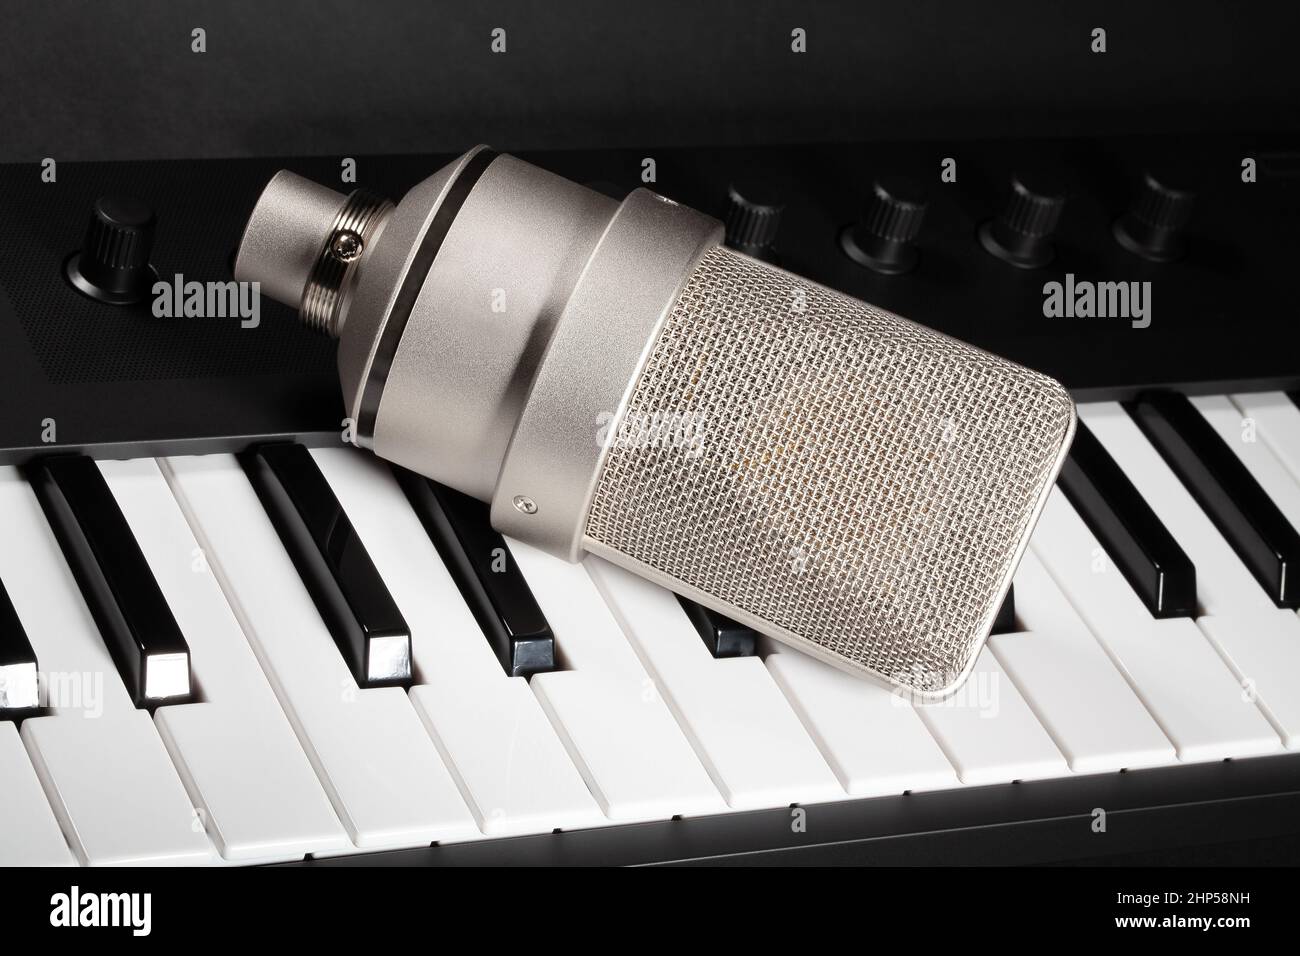 condenser microphone on keyboard background Stock Photo